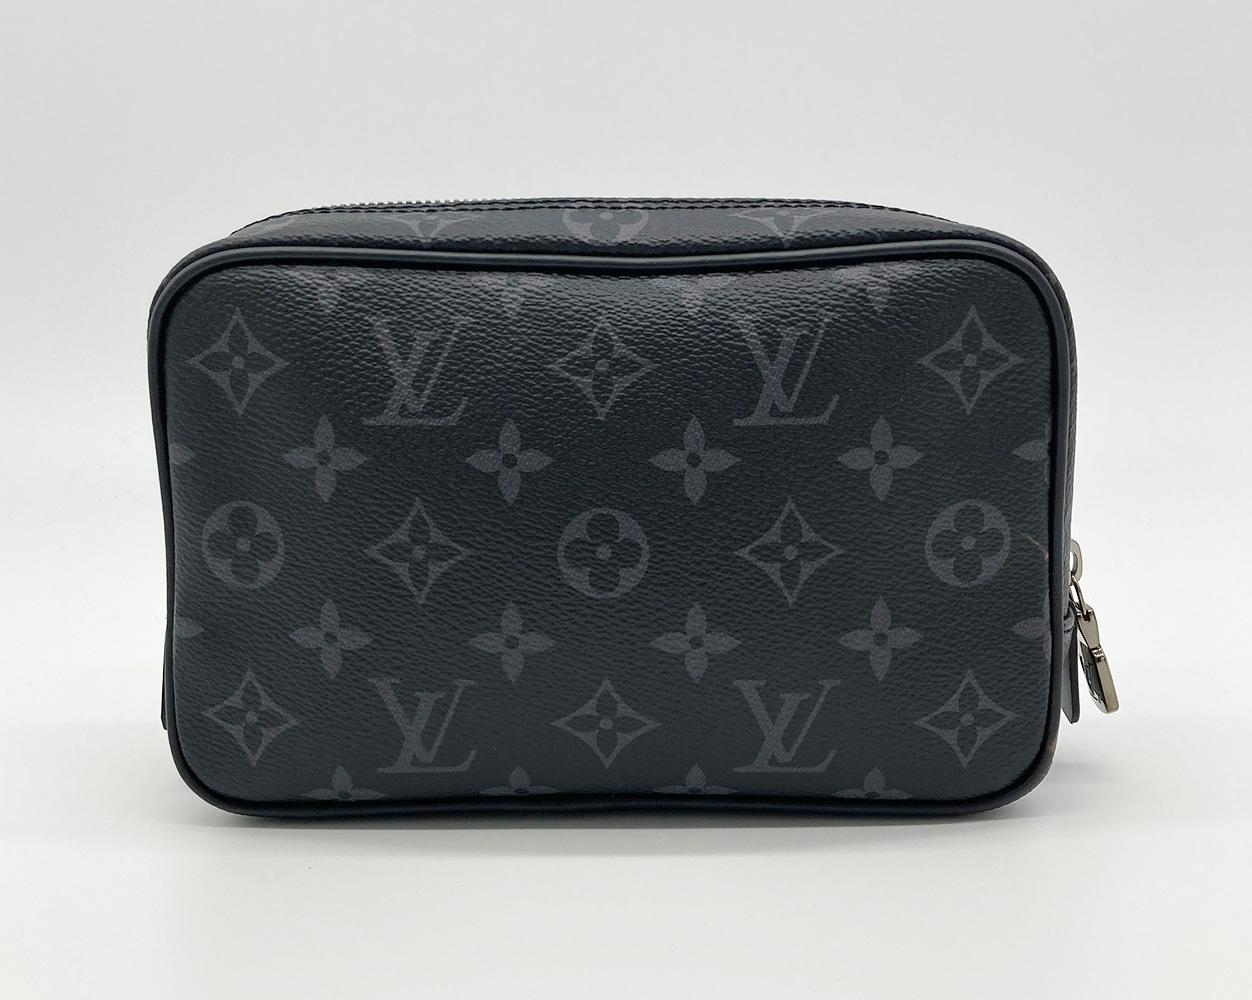 new without tags Louis Vuitton Black Monogram Eclipse Canvas Toiletry Pouch in excellent condition. Black monogram eclipse canvas exterior with top zipper closure. black leather interior. no stain smells or scuffs. clean corners edges and interior